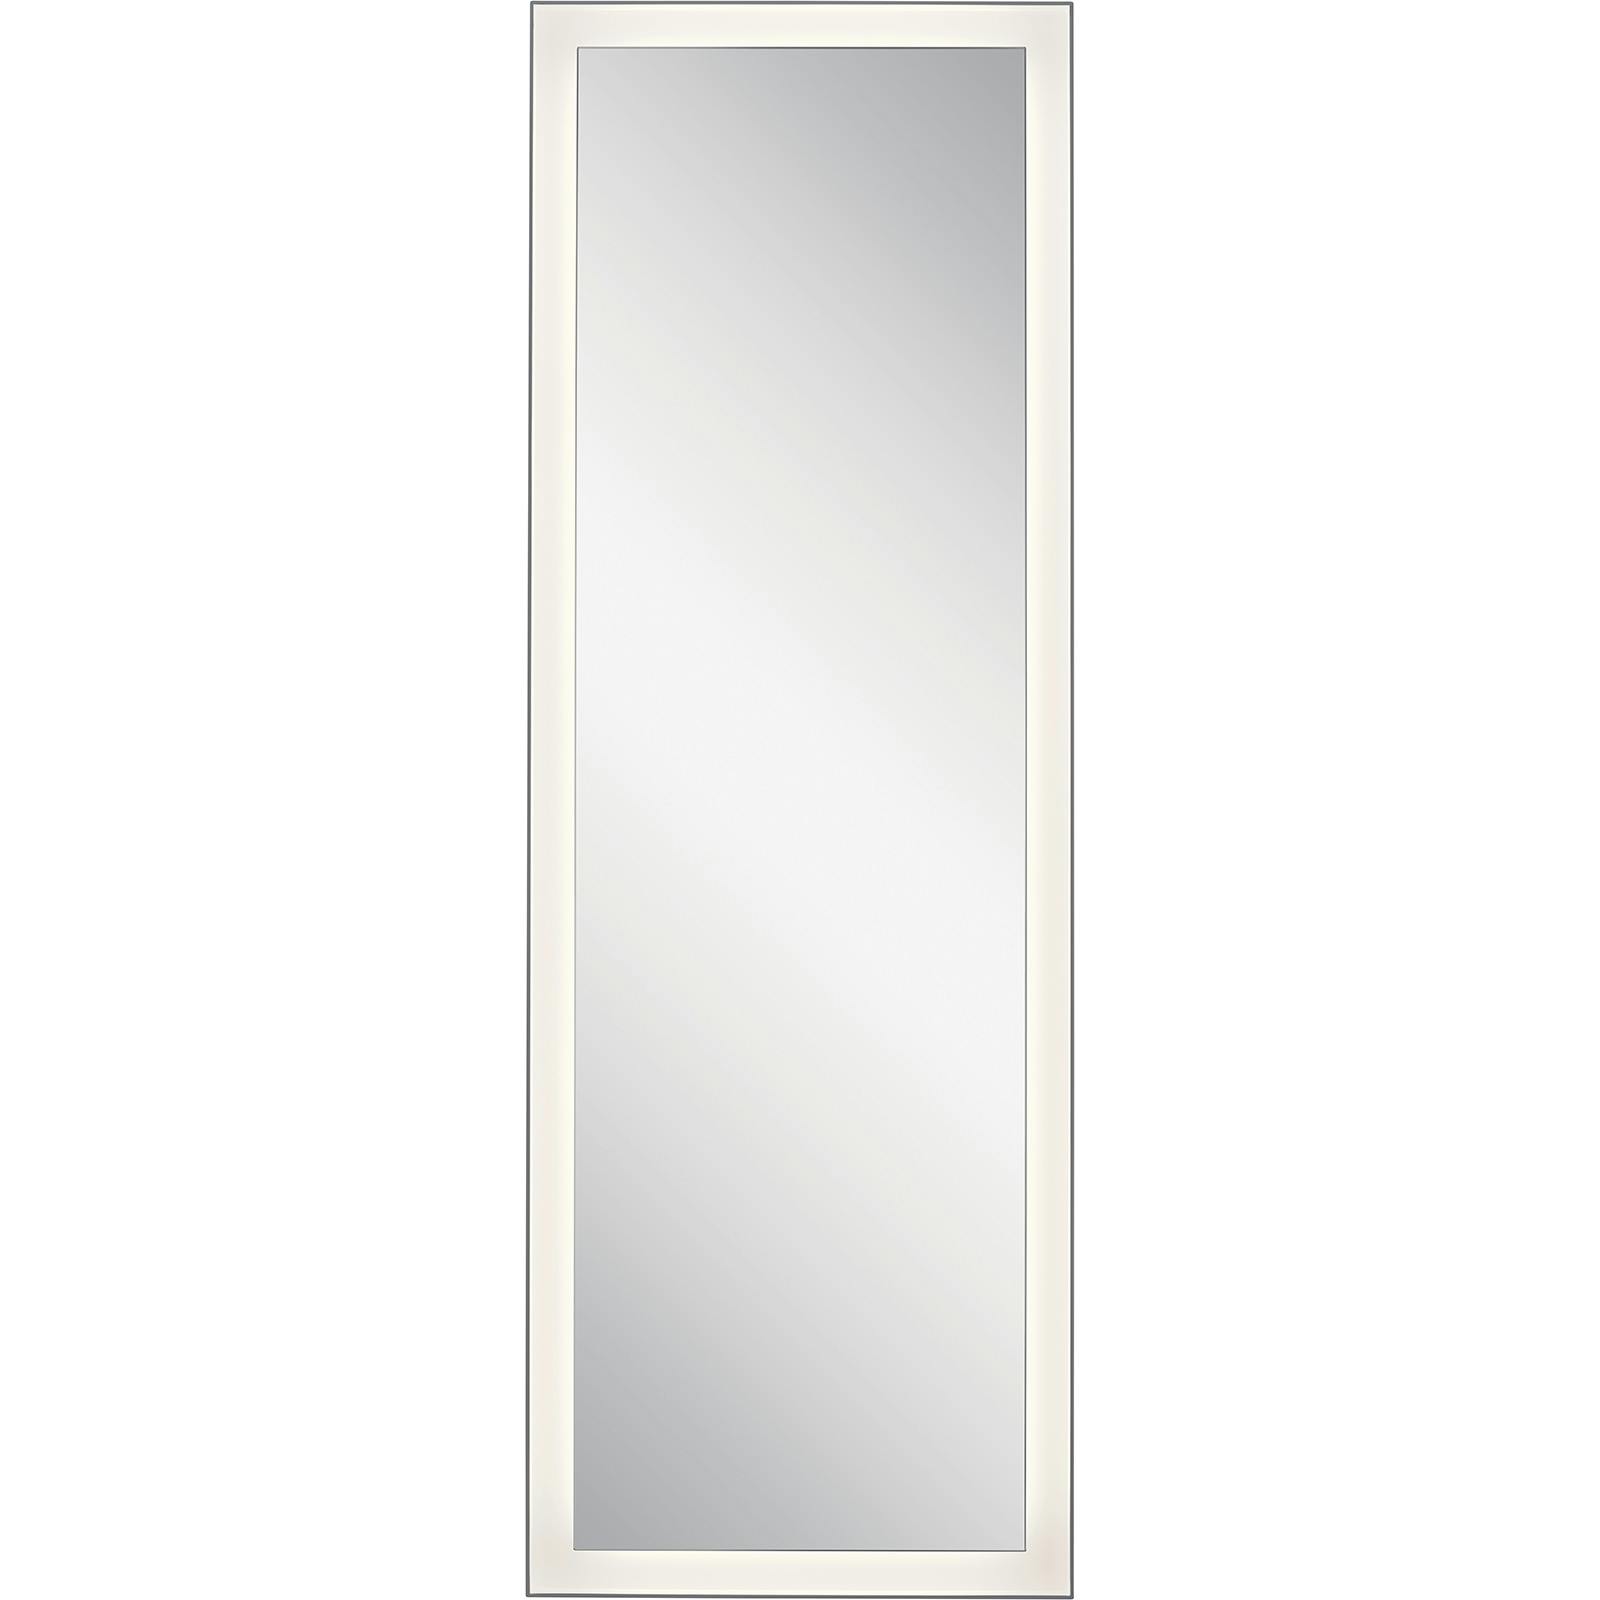 Front view of the Ryame™ 20" Lighted Mirror Silver on a white background